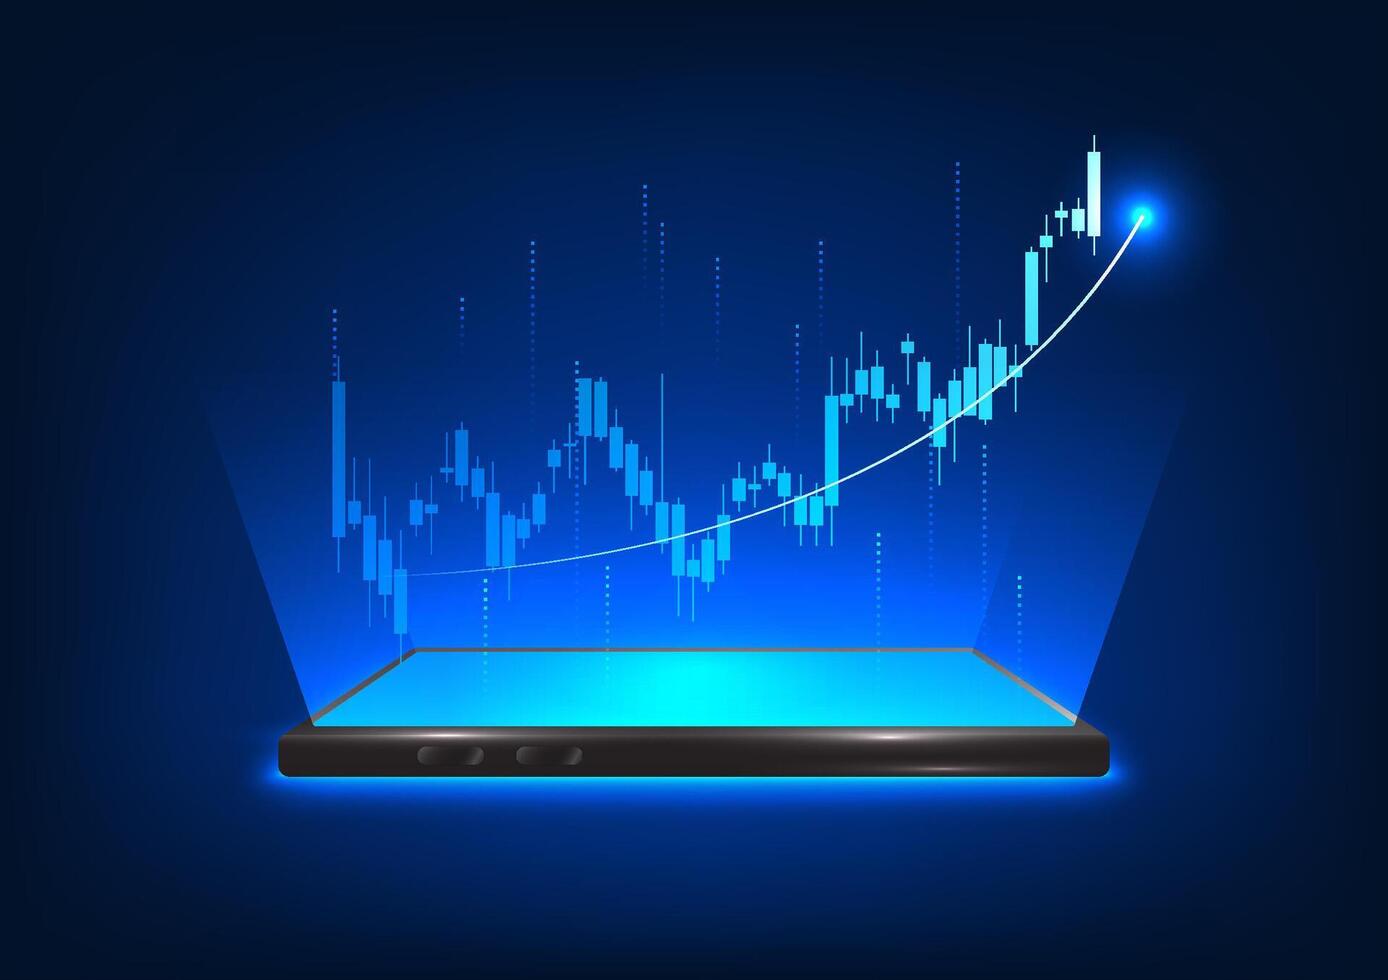 Smartphone technology that displays price graphs in the capital market Allows you to trade stocks via mobile phone and check the status of the price, Mobile phone that projects stock holograms vector